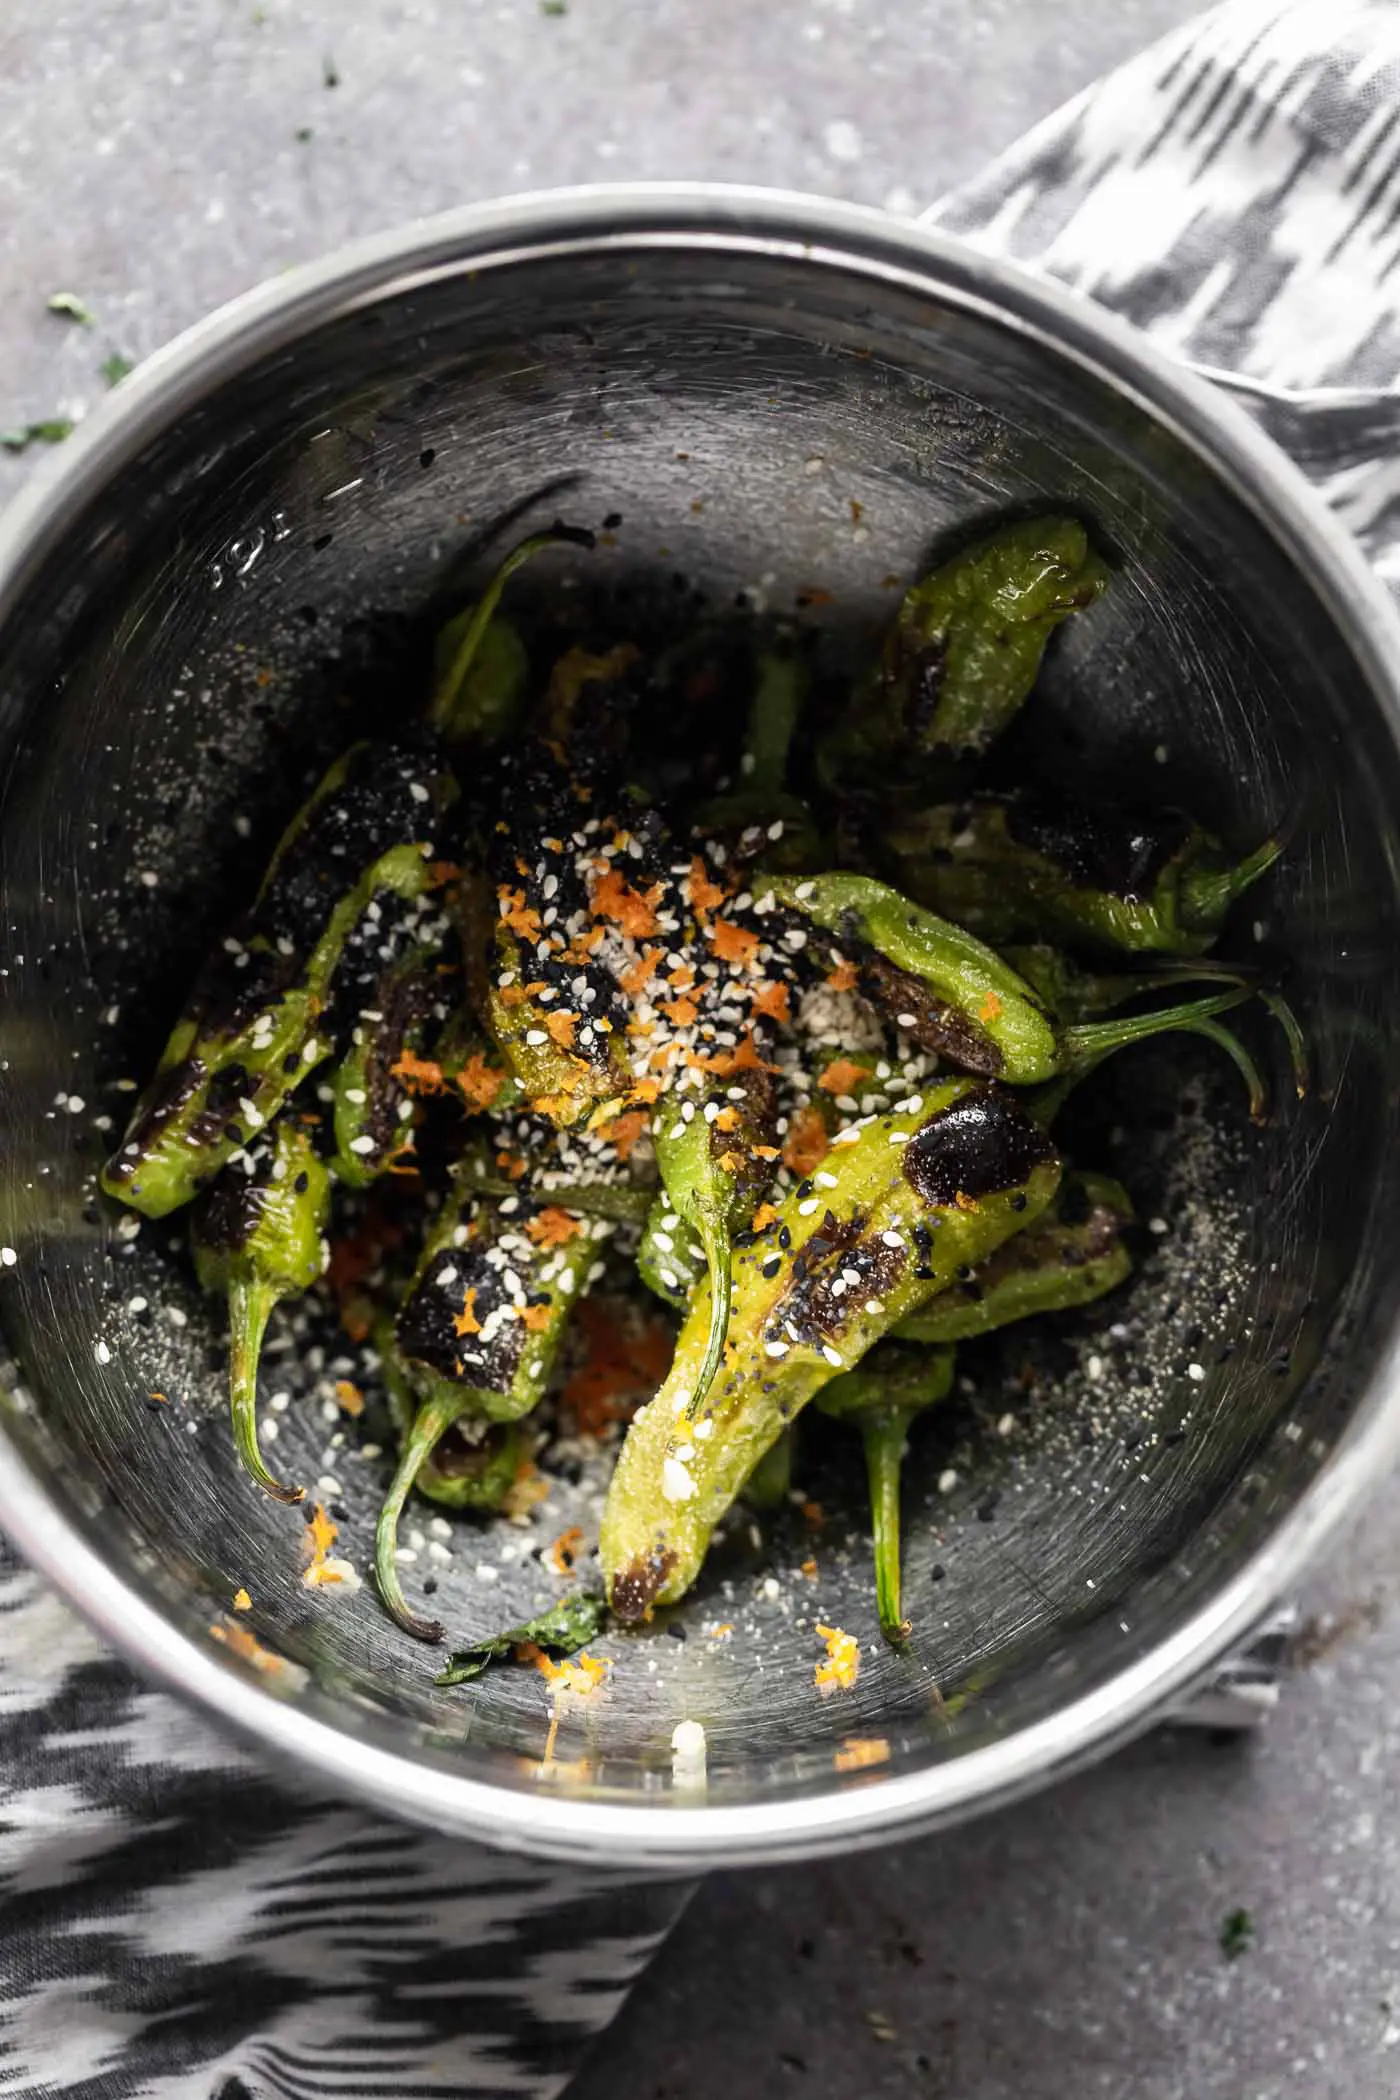 These Roasted Shishito Peppers with Soy Glaze are the perfect blend of sweet, spicy and savory. Each pepper is charred under the broiler, then tossed in an easy soy-based glaze, sesame seeds and a little bit of orange peel. The perfect snack!